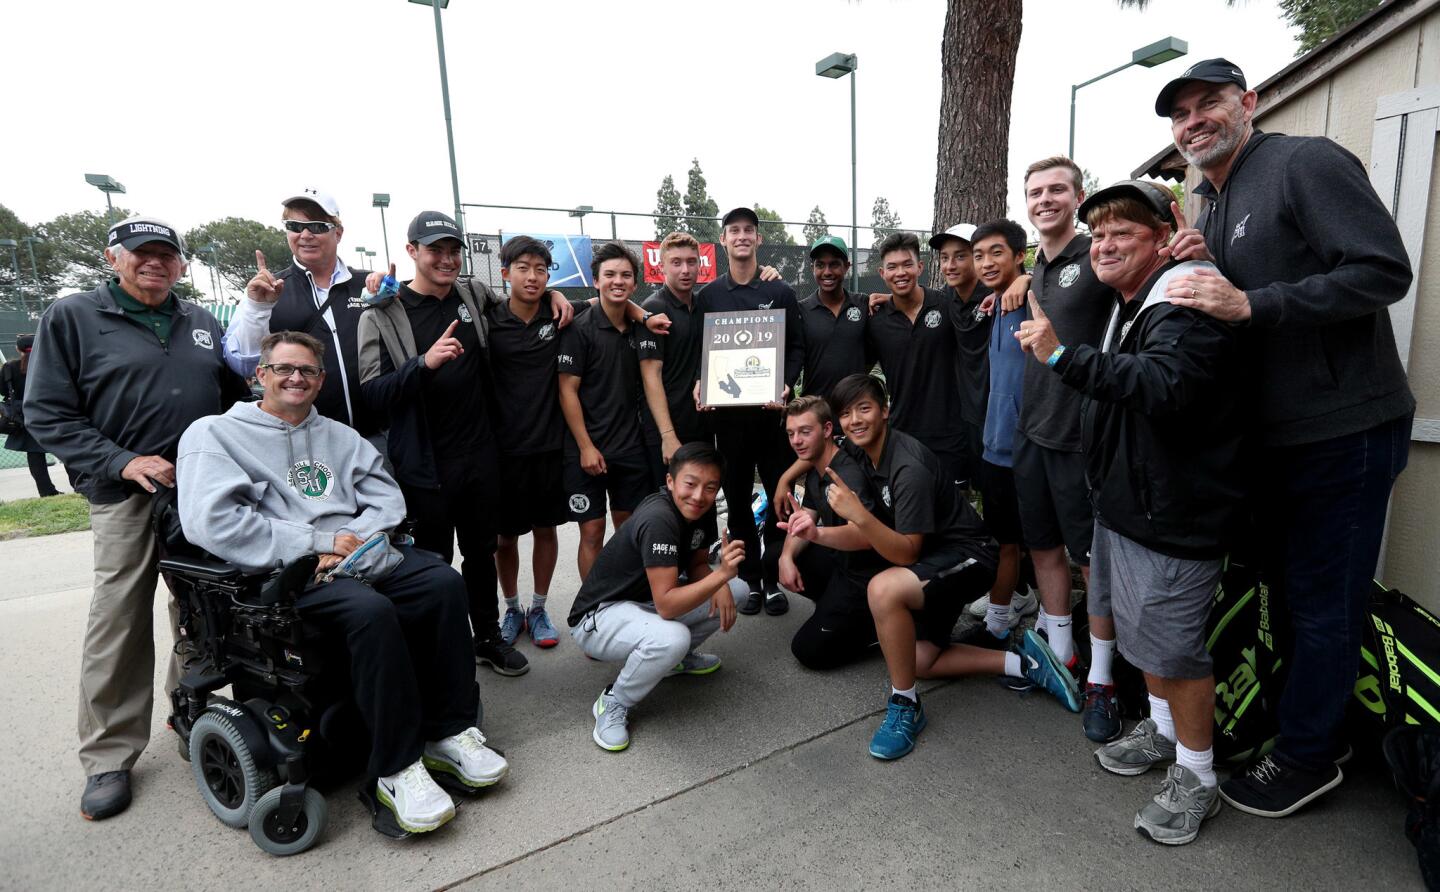 The Sage Hill School boys' tennis team and coaching staff celebrate after winning the CIF Southern Section Division 1 championship against Beckman at the Claremont Club in Claremont on Friday.